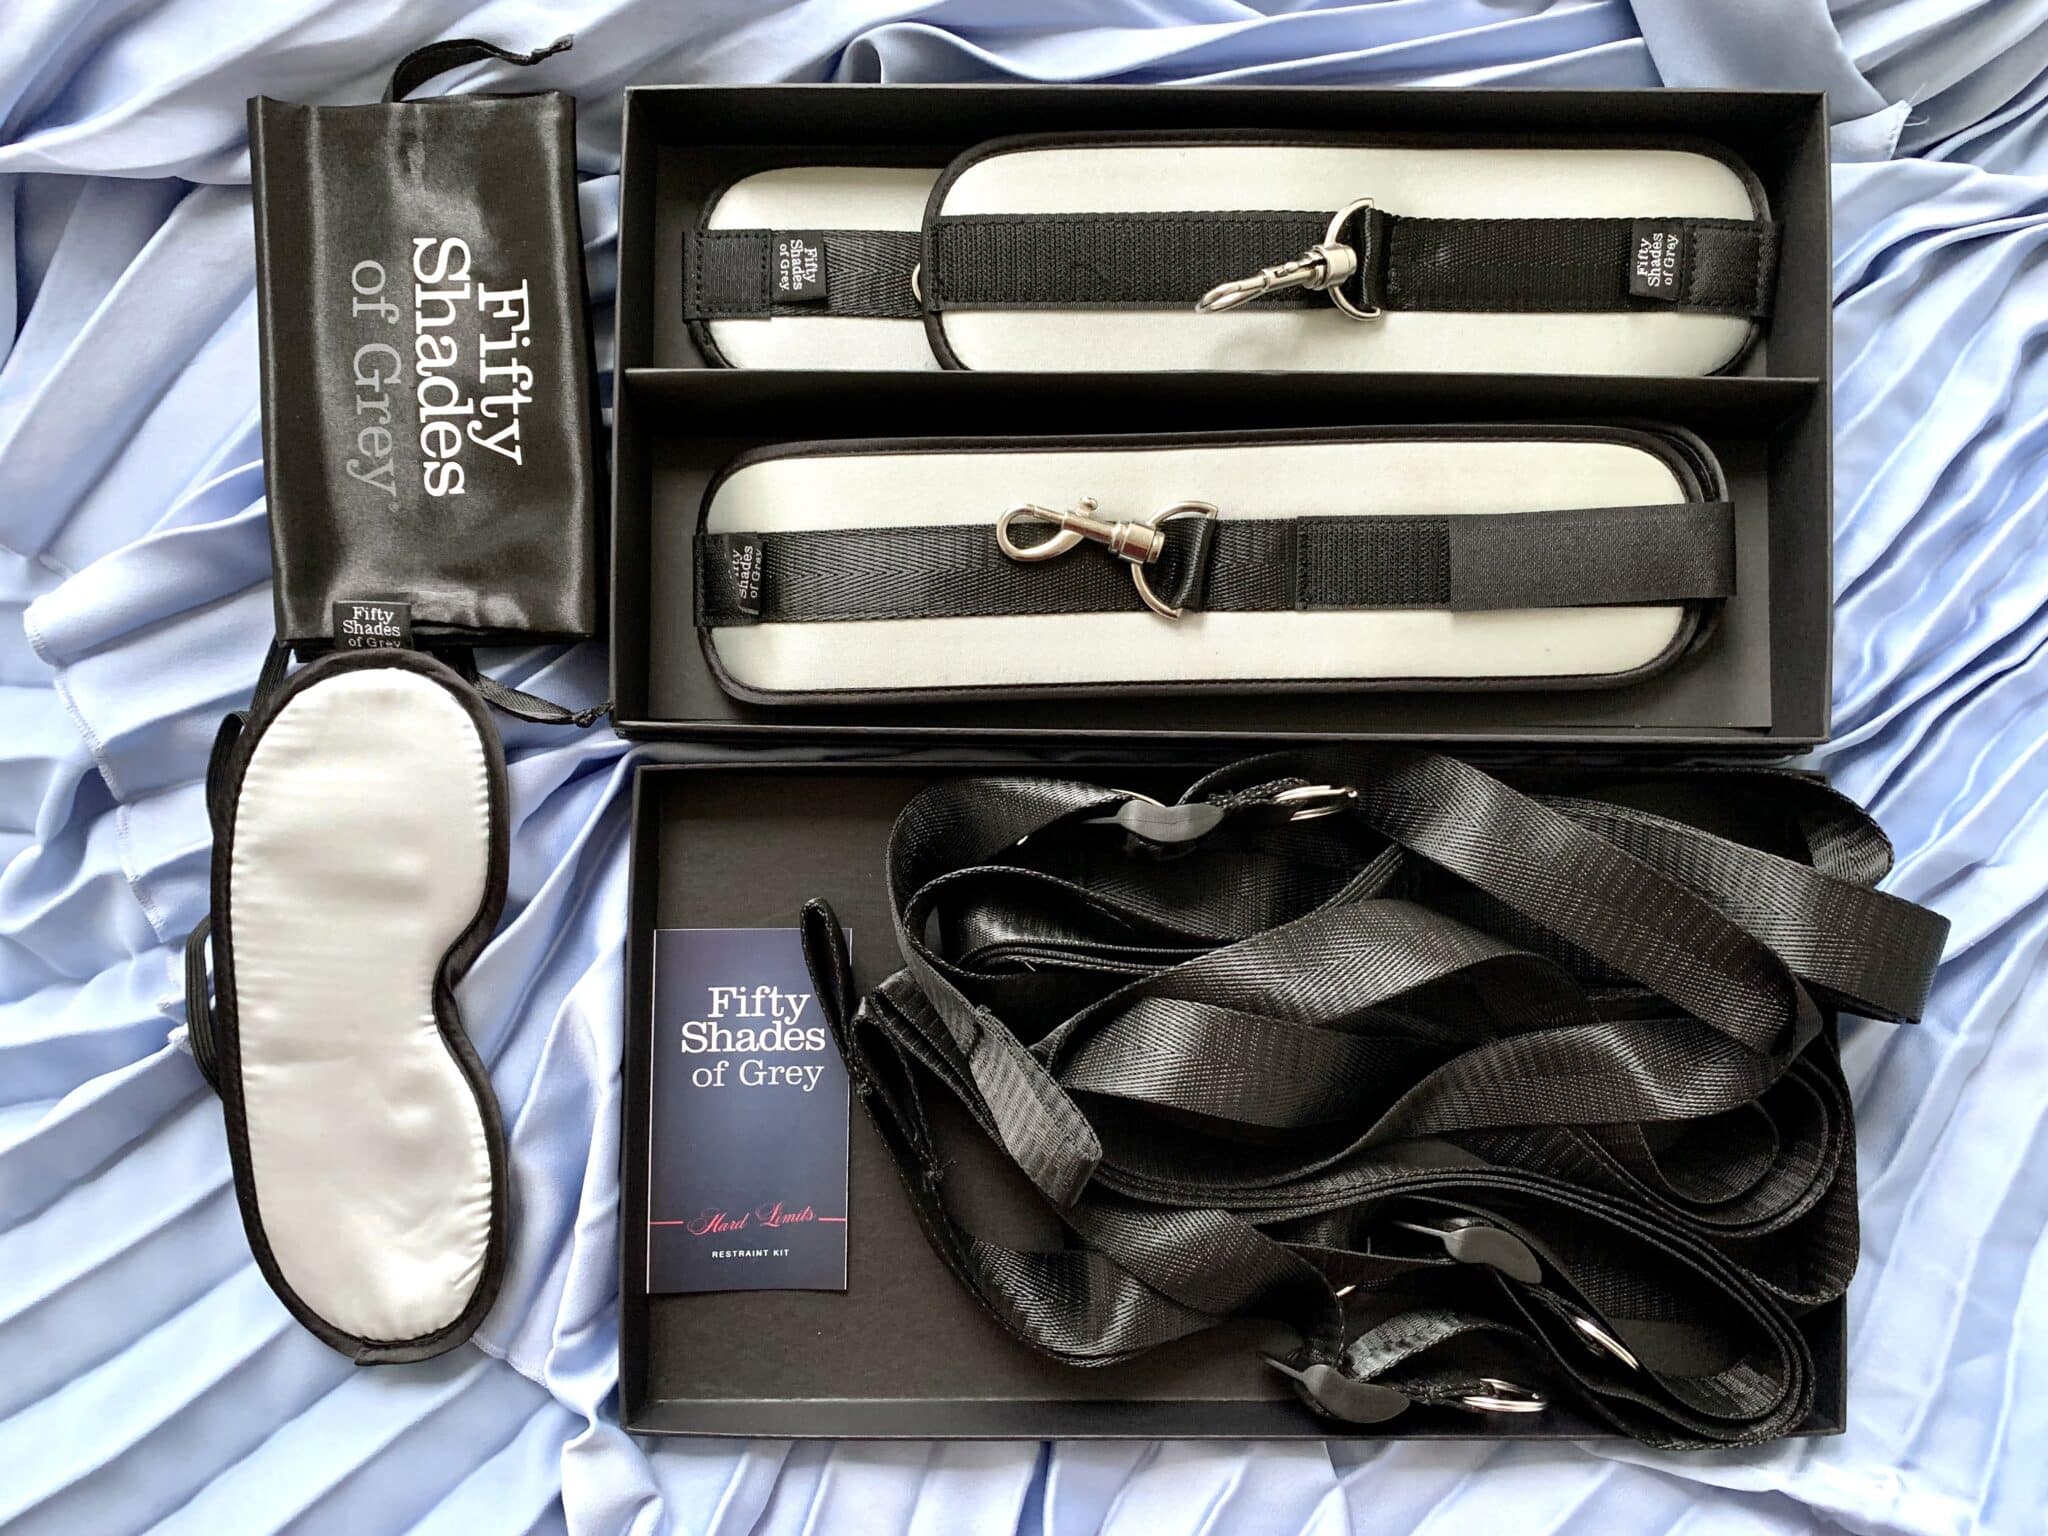 Fifty Shades of Grey Hard Limits Bed Restraint Kit Affordability Check: The Price of Fifty Shades of Grey Hard Limits Bed Restraint Kit